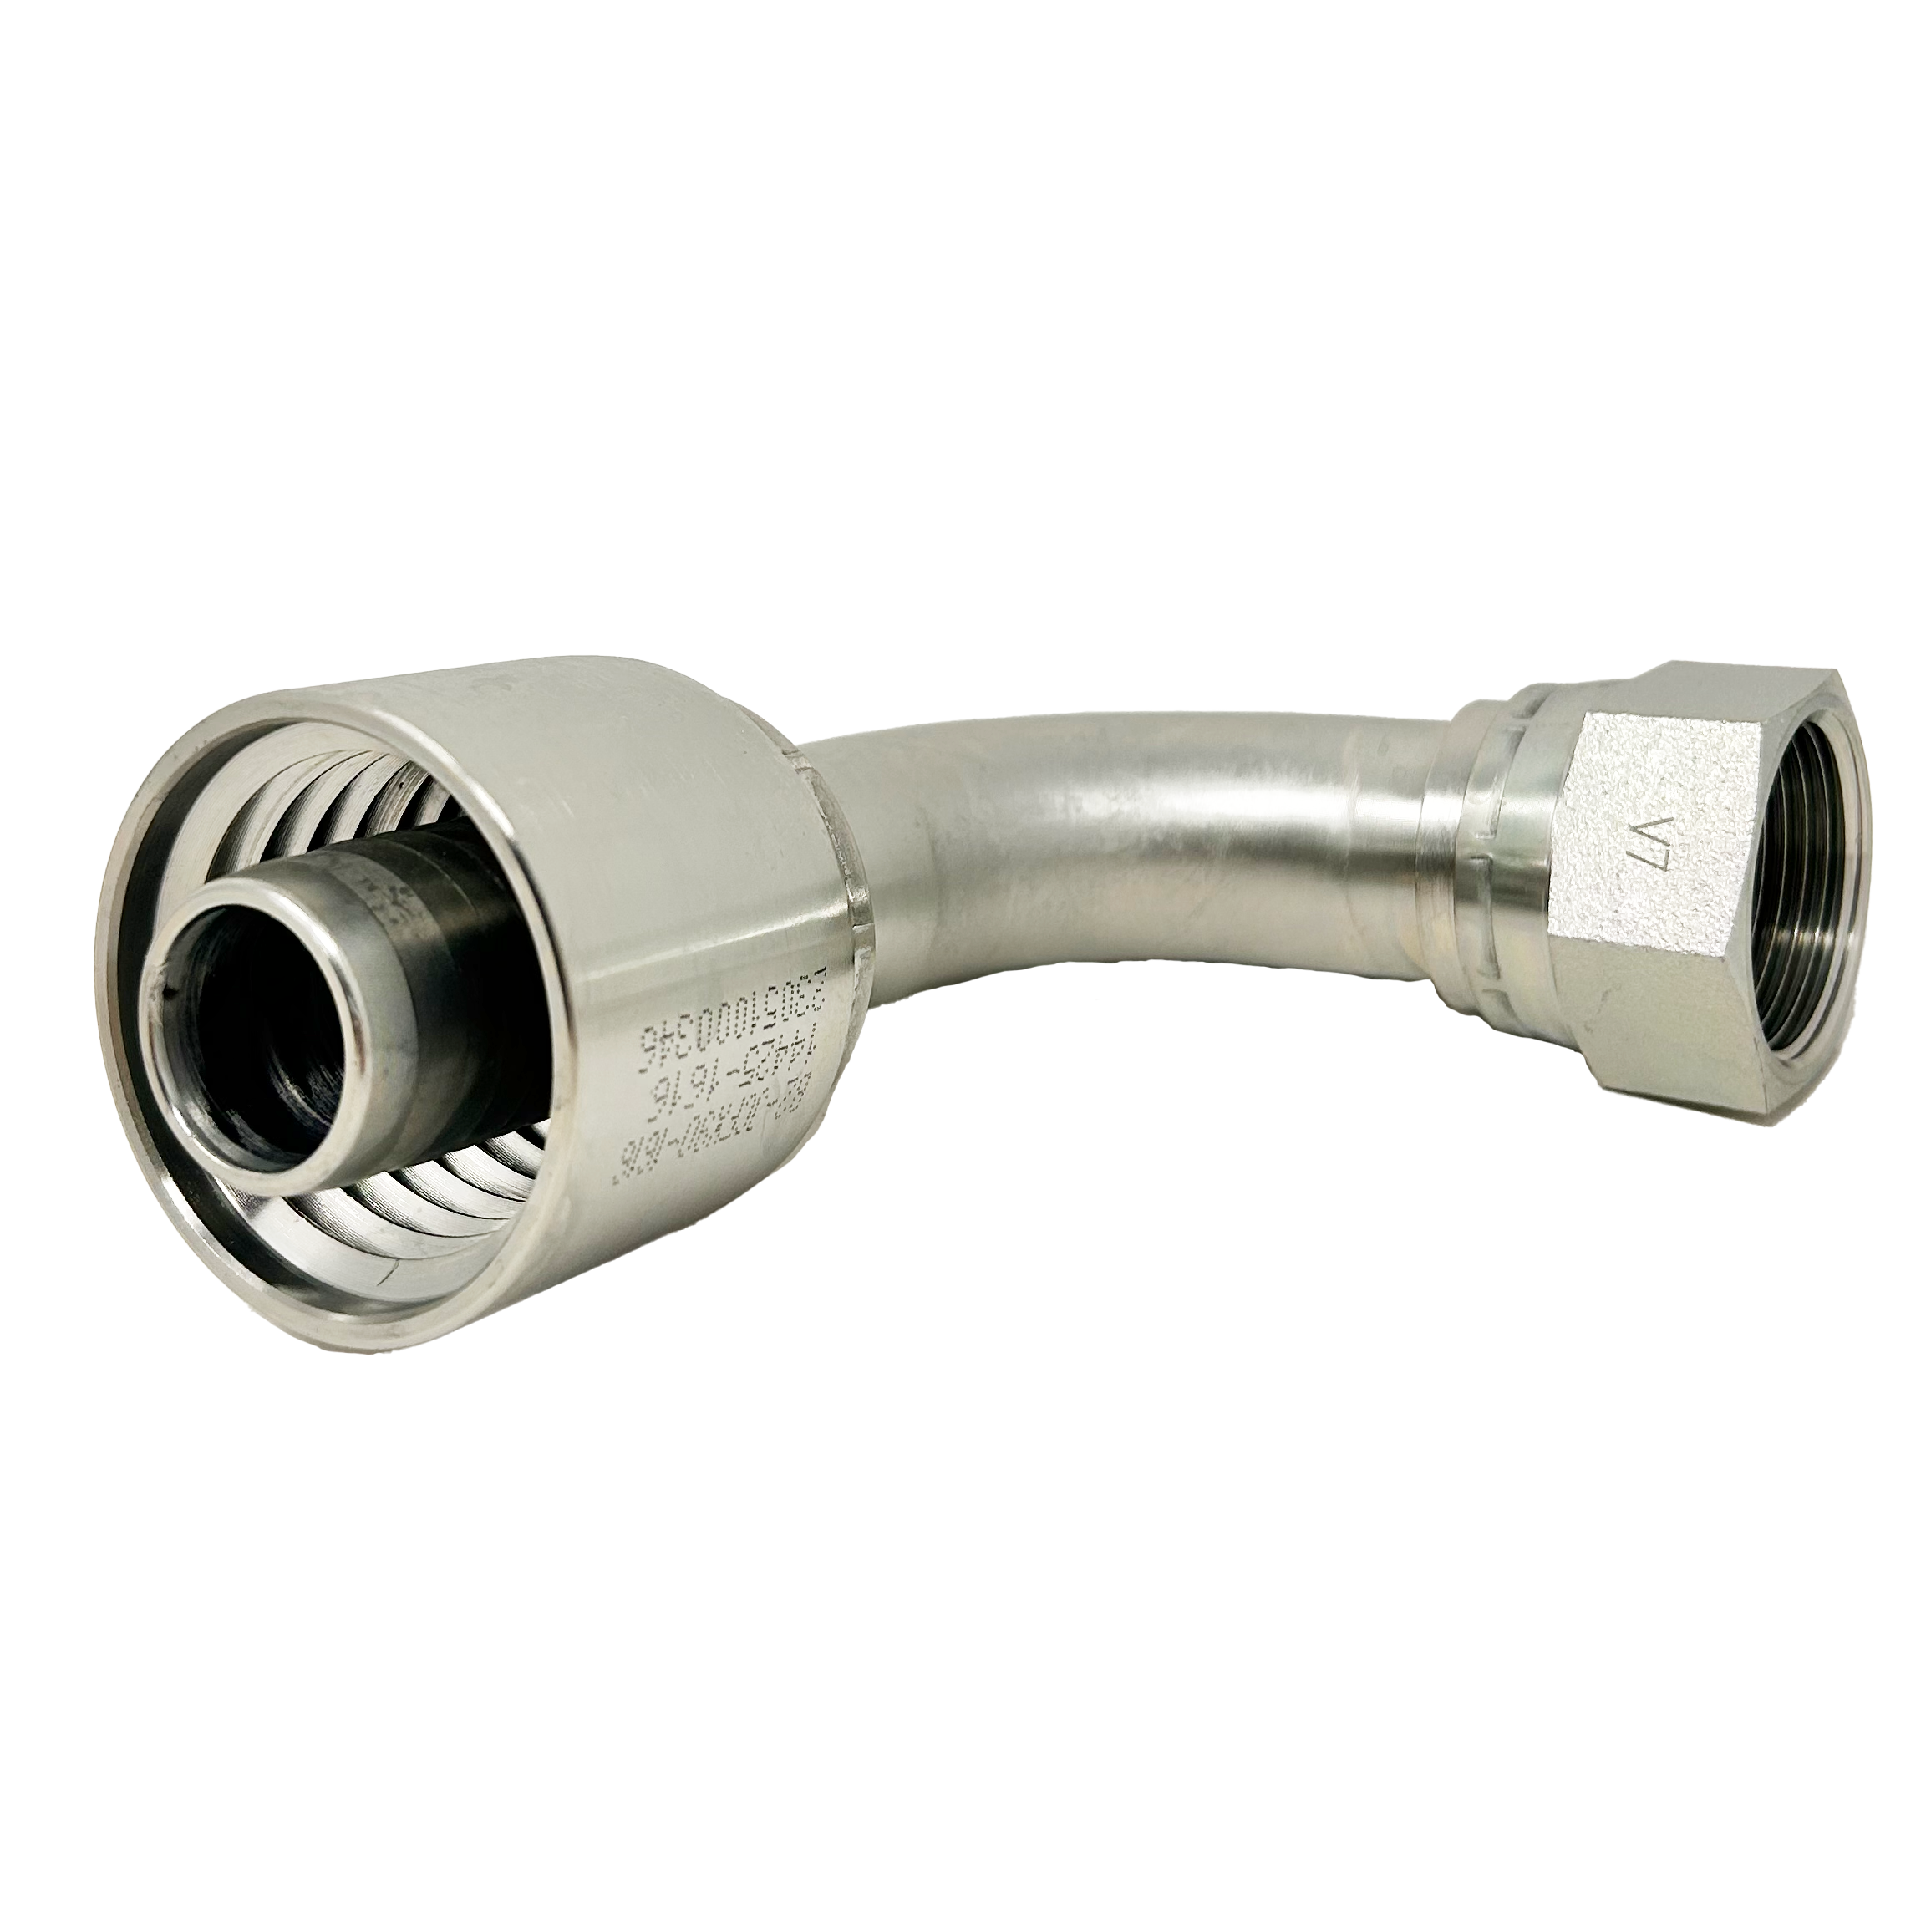 B2-JCFX90-1010S: Continental Hose Fitting, 0.625 (5/8") Hose ID x 7/8-14 Female JIC, 90-Degree Swivel Connection